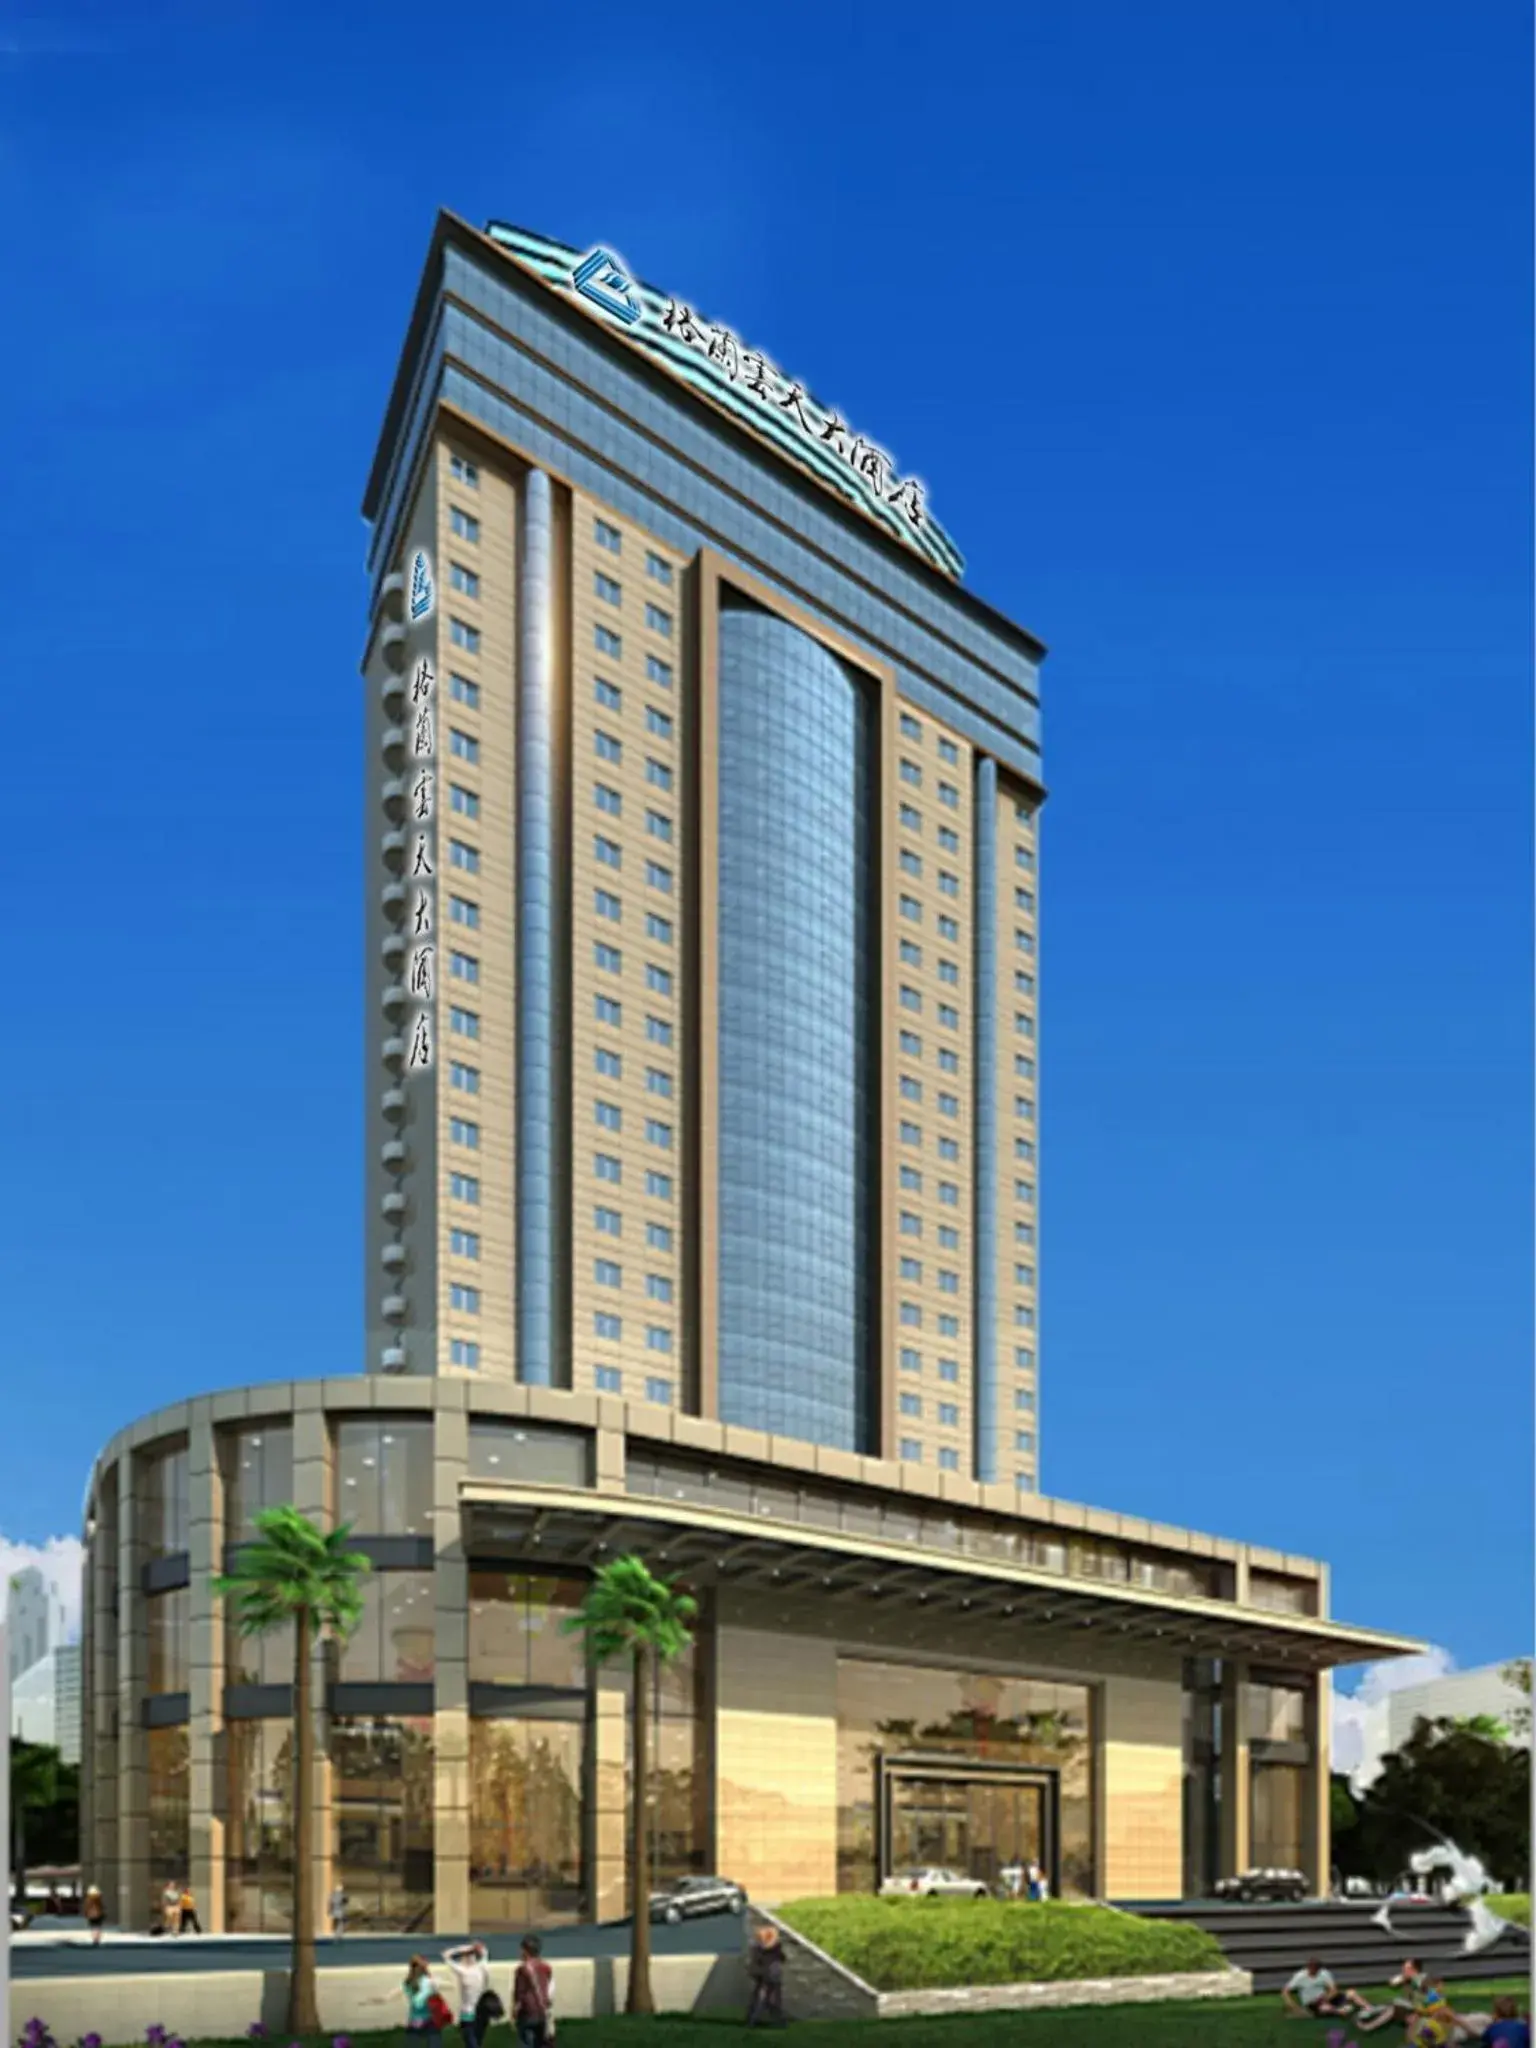 Property building in Wan Yue Grand Skylight Hotel